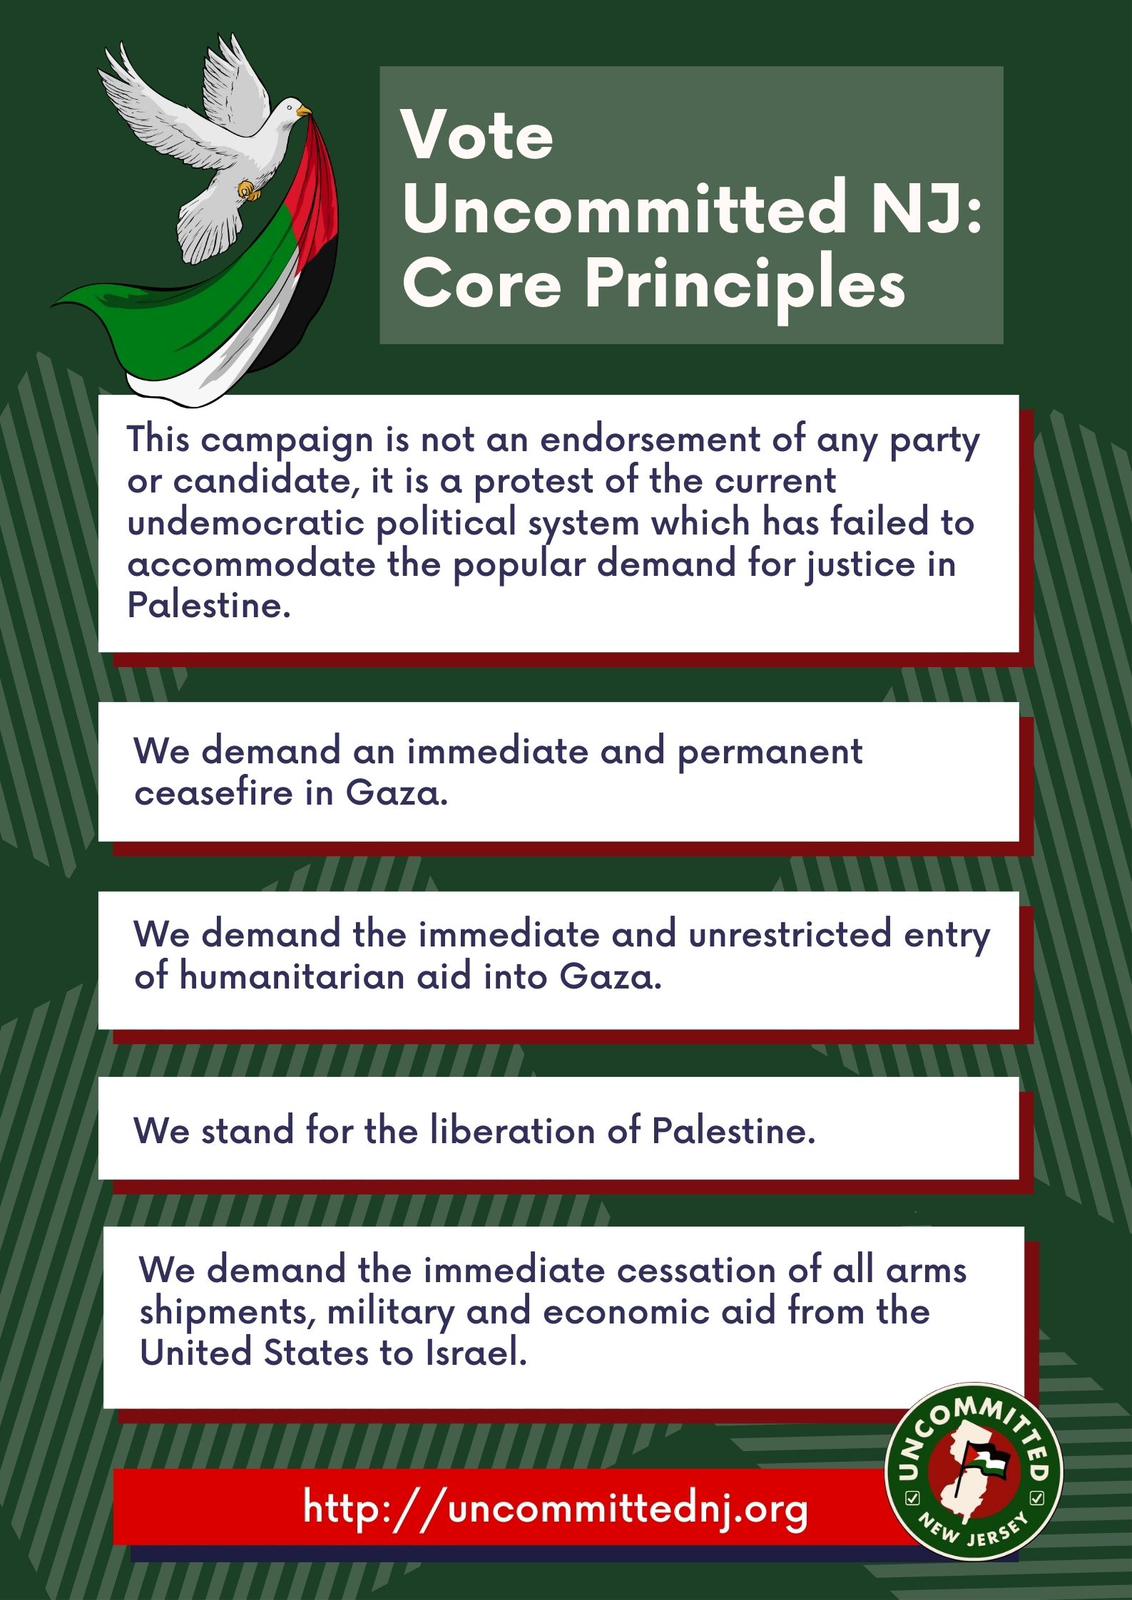 Vote Uncommitted NJ core principles.
This campaign is not an endorsement of any party or candidate, it is a protest
of the current undemocratic political system which has failed to accomodate the
popular demand for justice in Palestine. We demand an immediate and permanent
ceasefire in Gaza. We demand the immediate and unrestricted entry of
humanitarian aid into Gaza. We stand for the liberation of Palestine